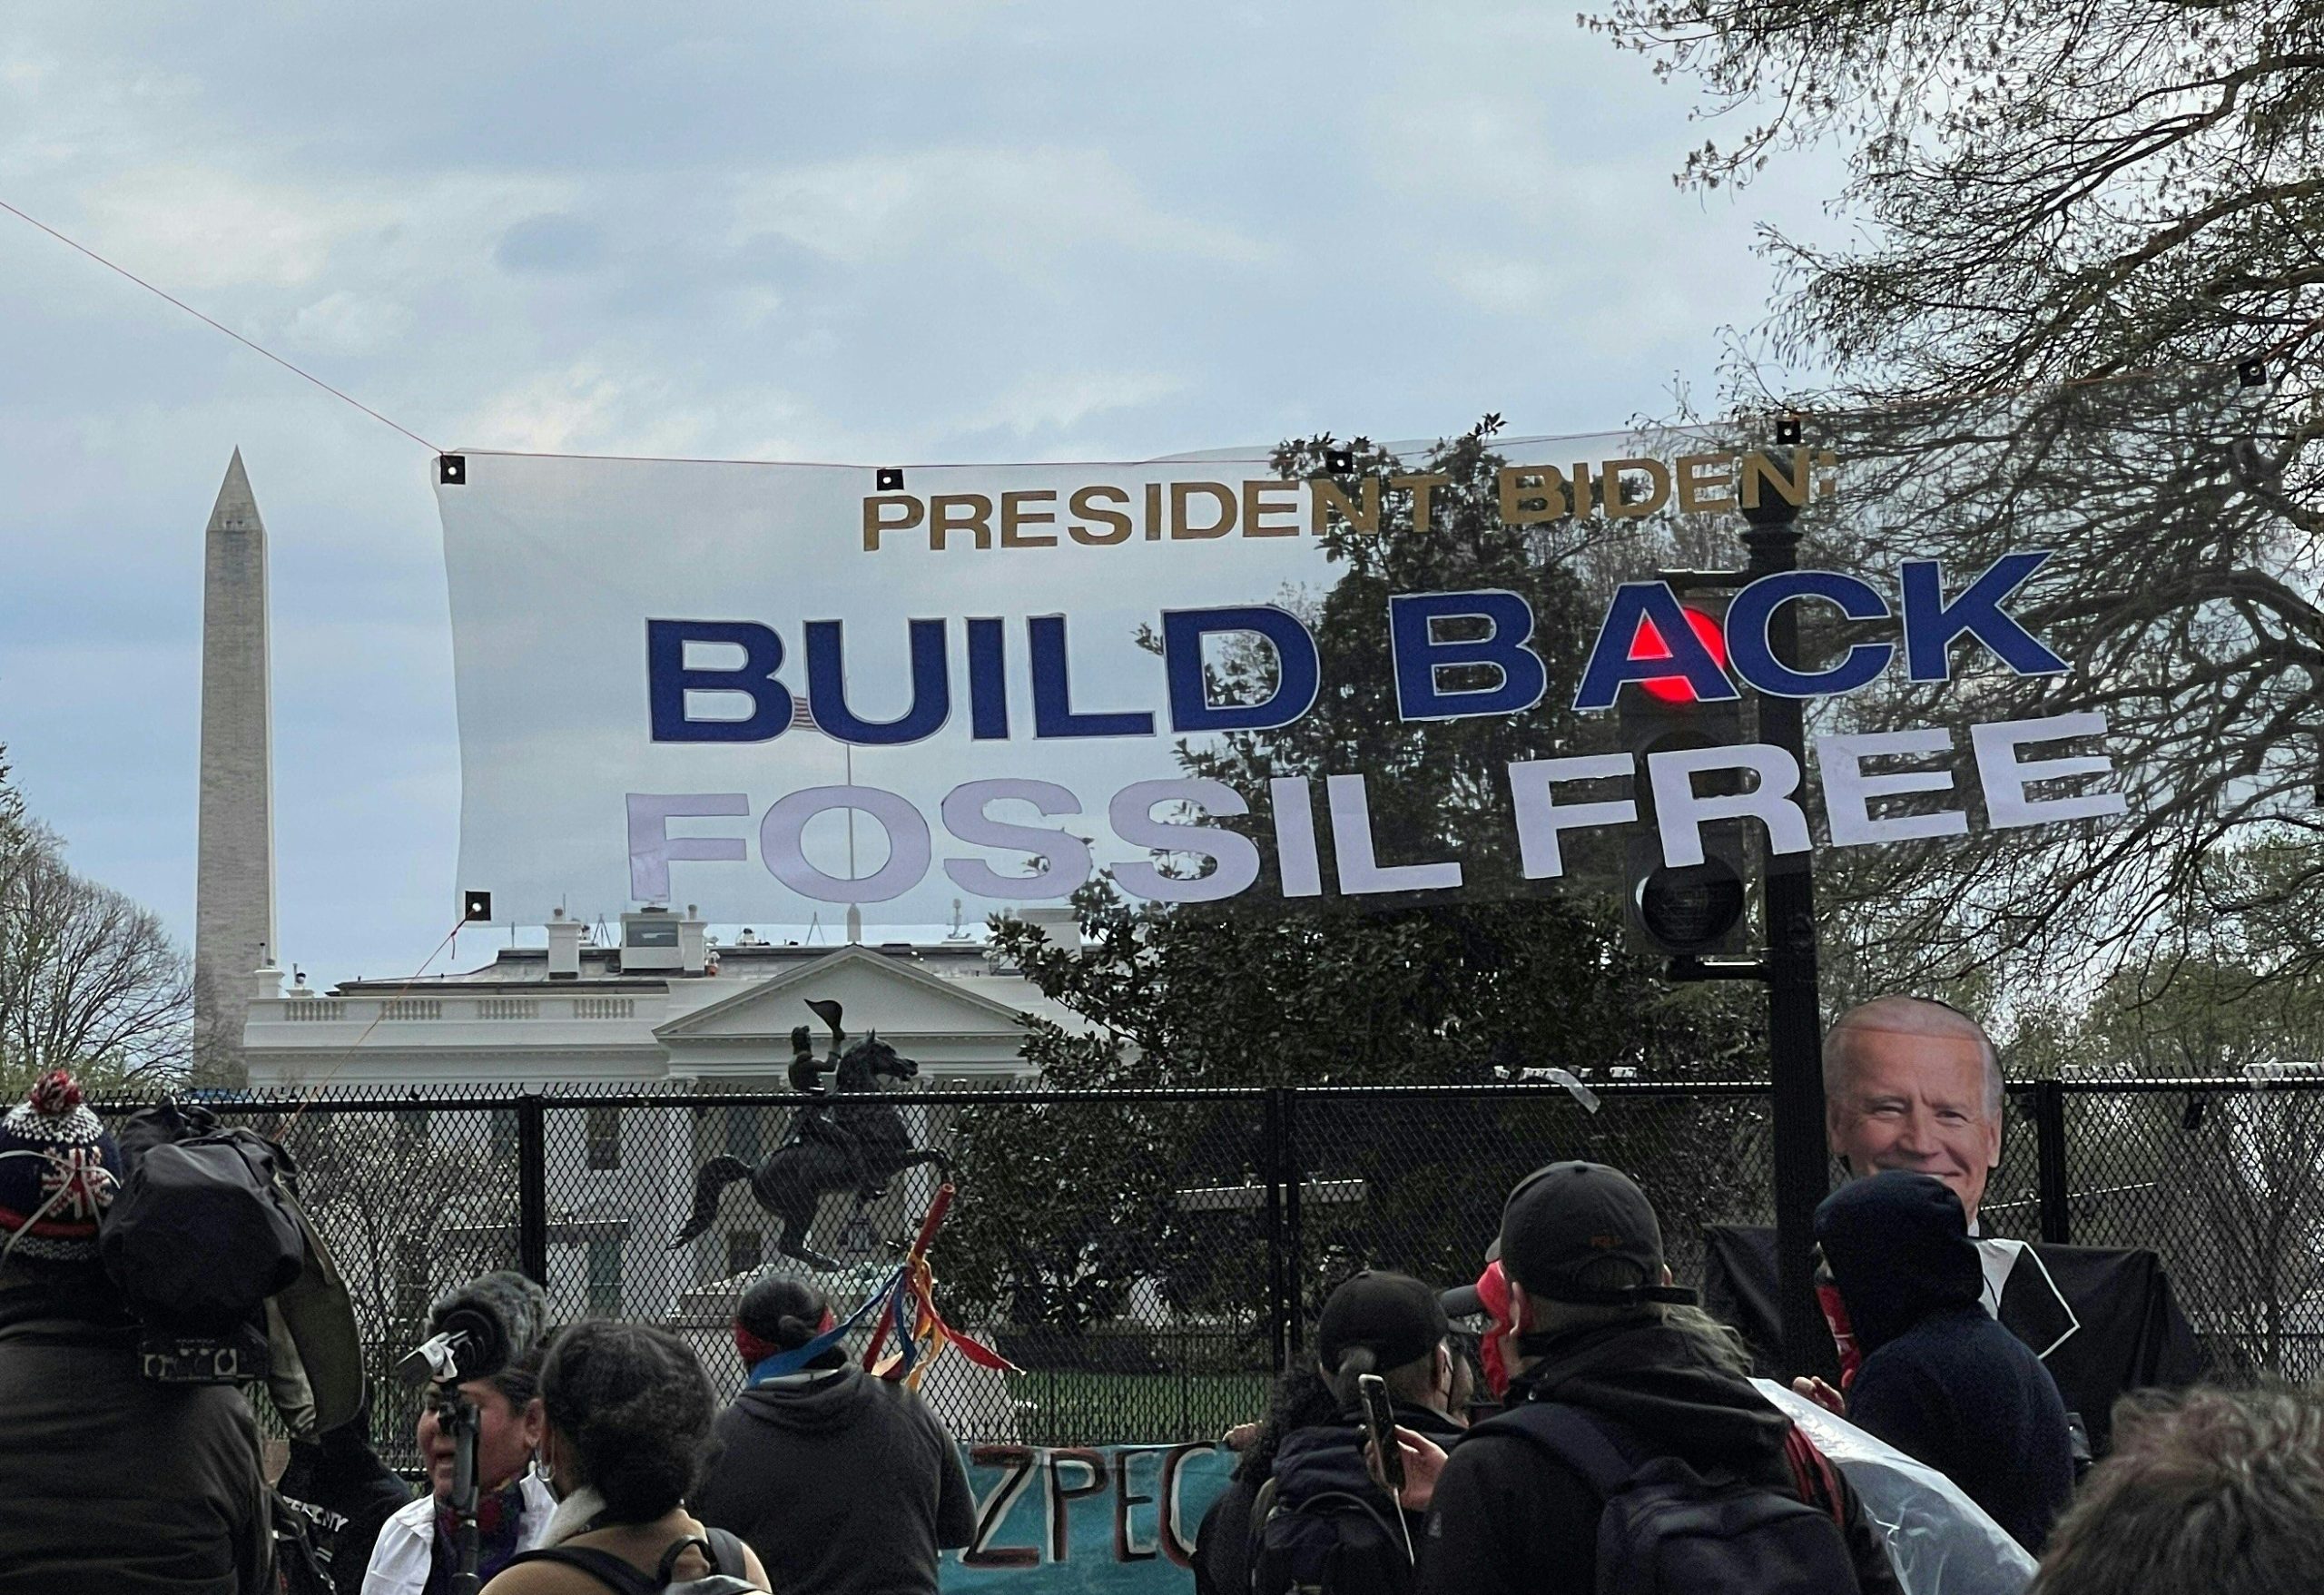 Activists display banners protesting existing pipelines on April 1, 2021, one block from the White House. (Daniel Slim/AFP via Getty Images)